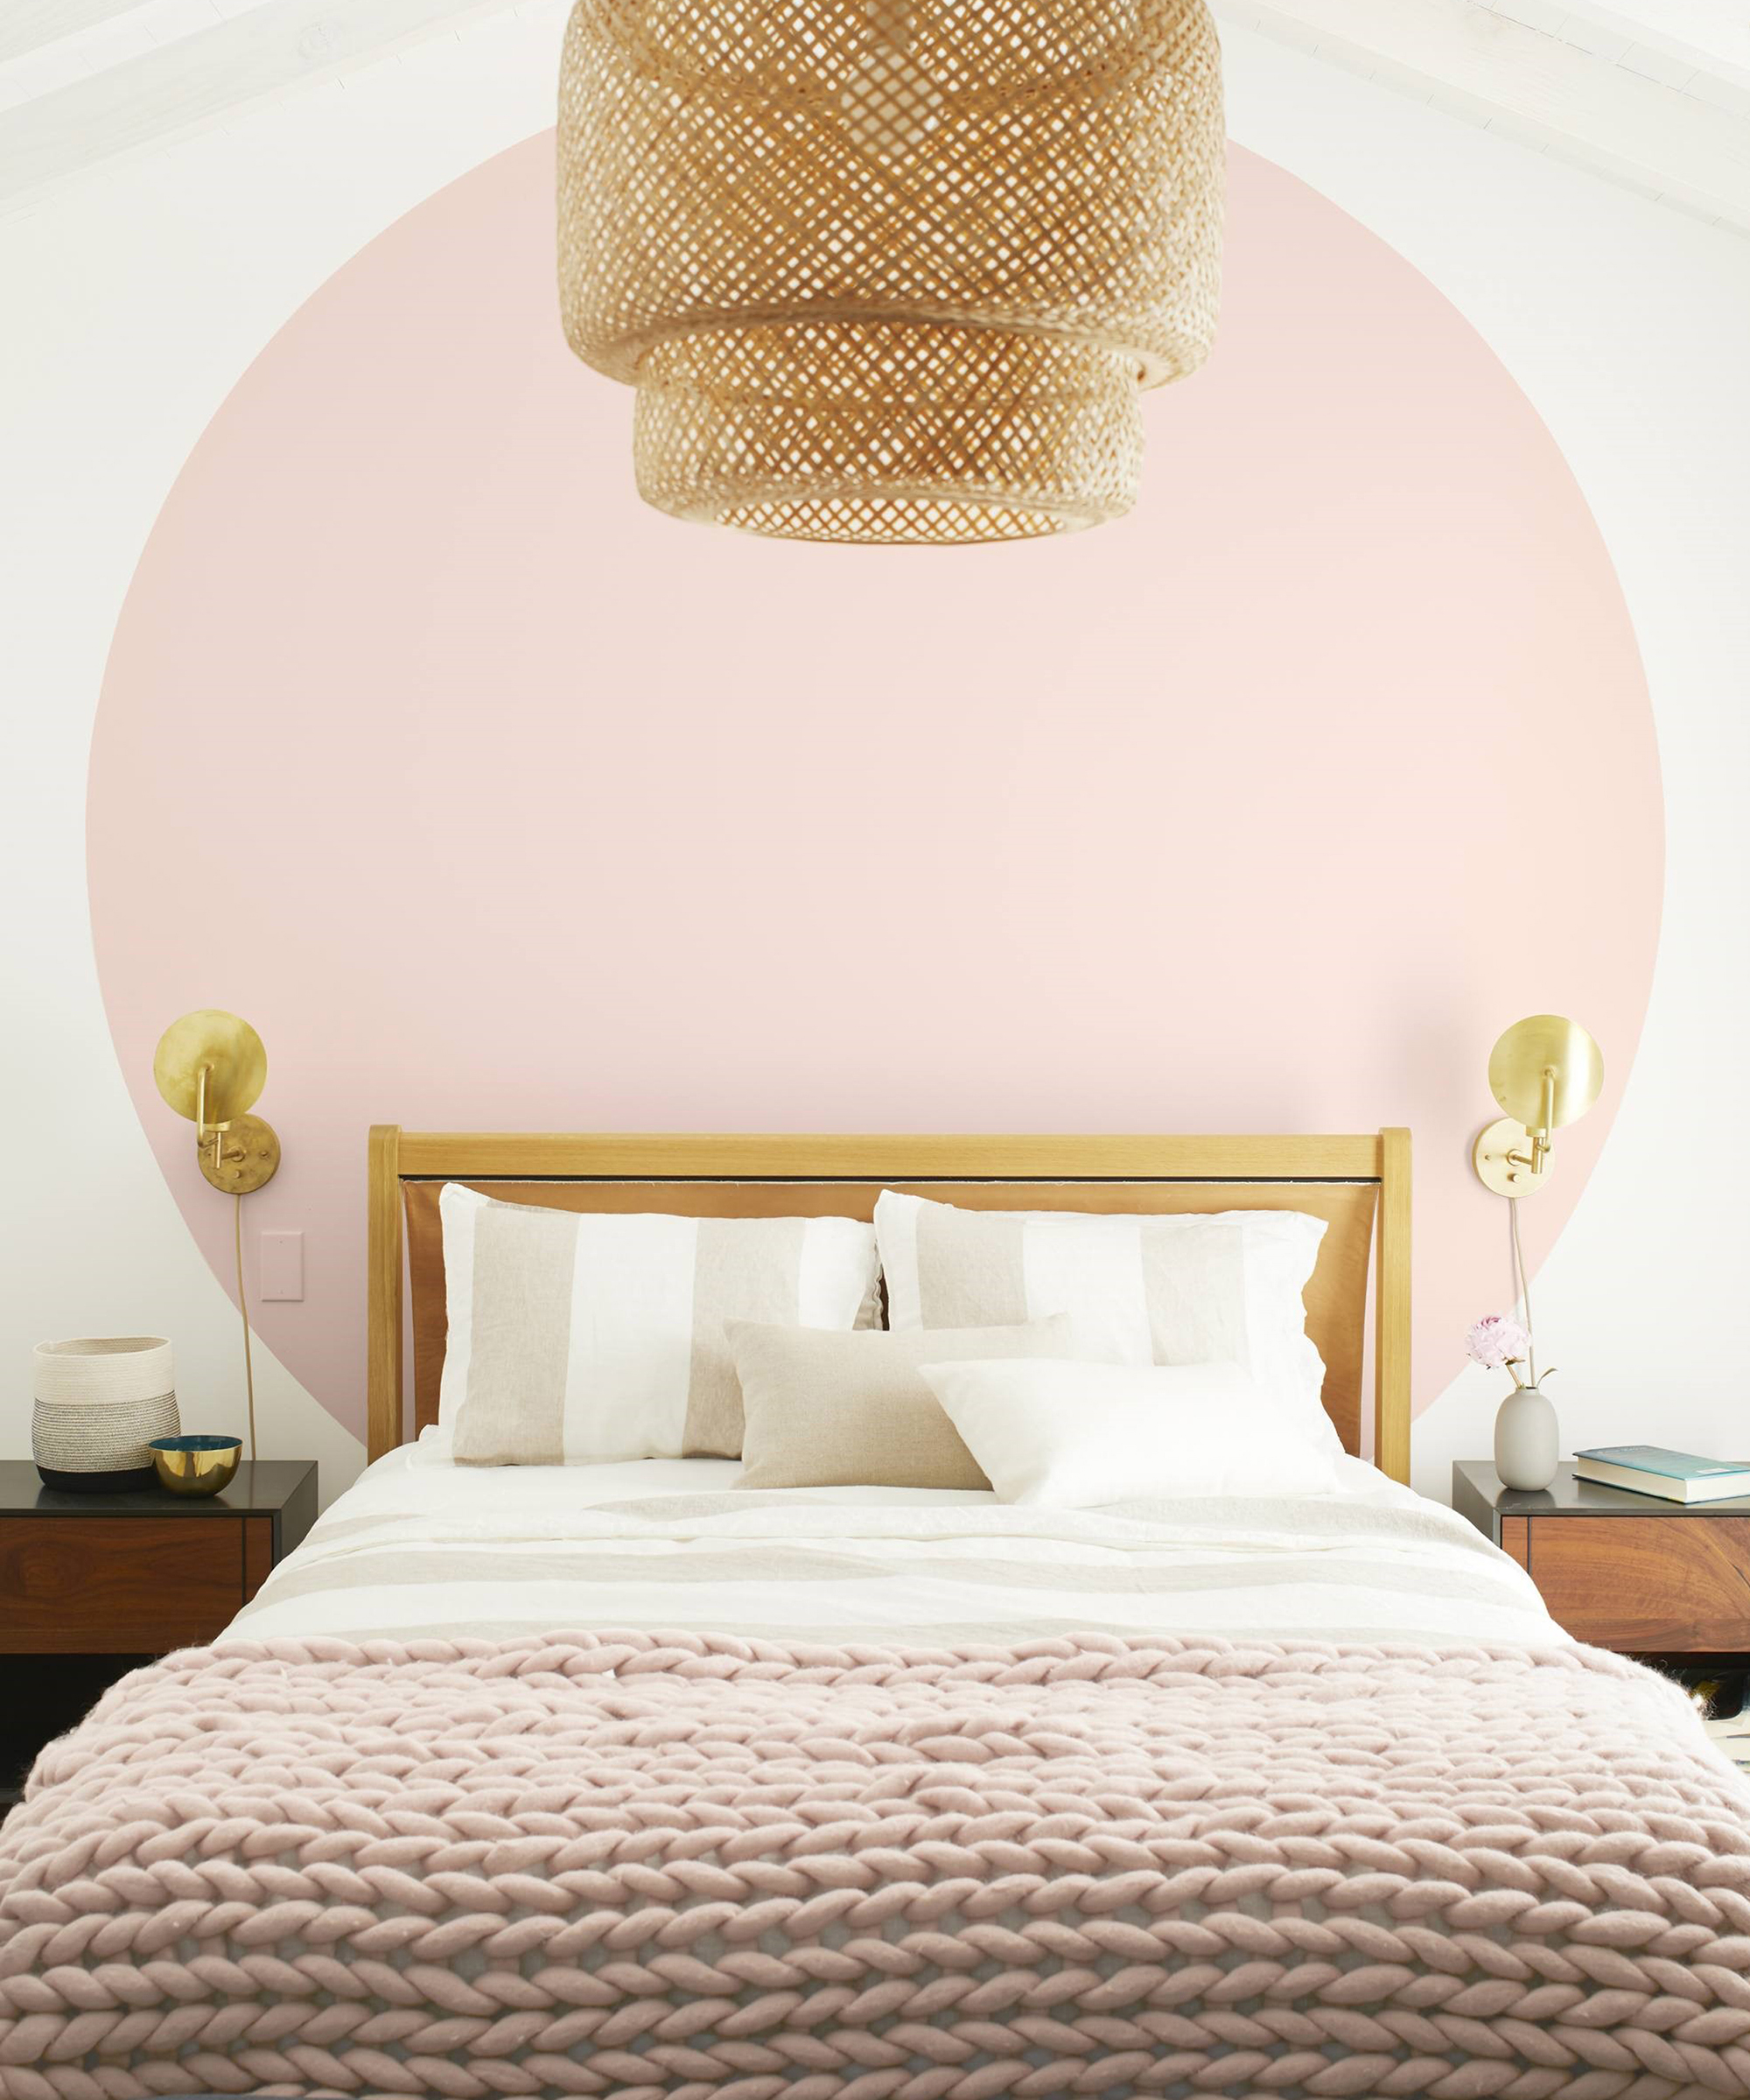 A wooden bed with a pink throw in front of a pink circular wall motif